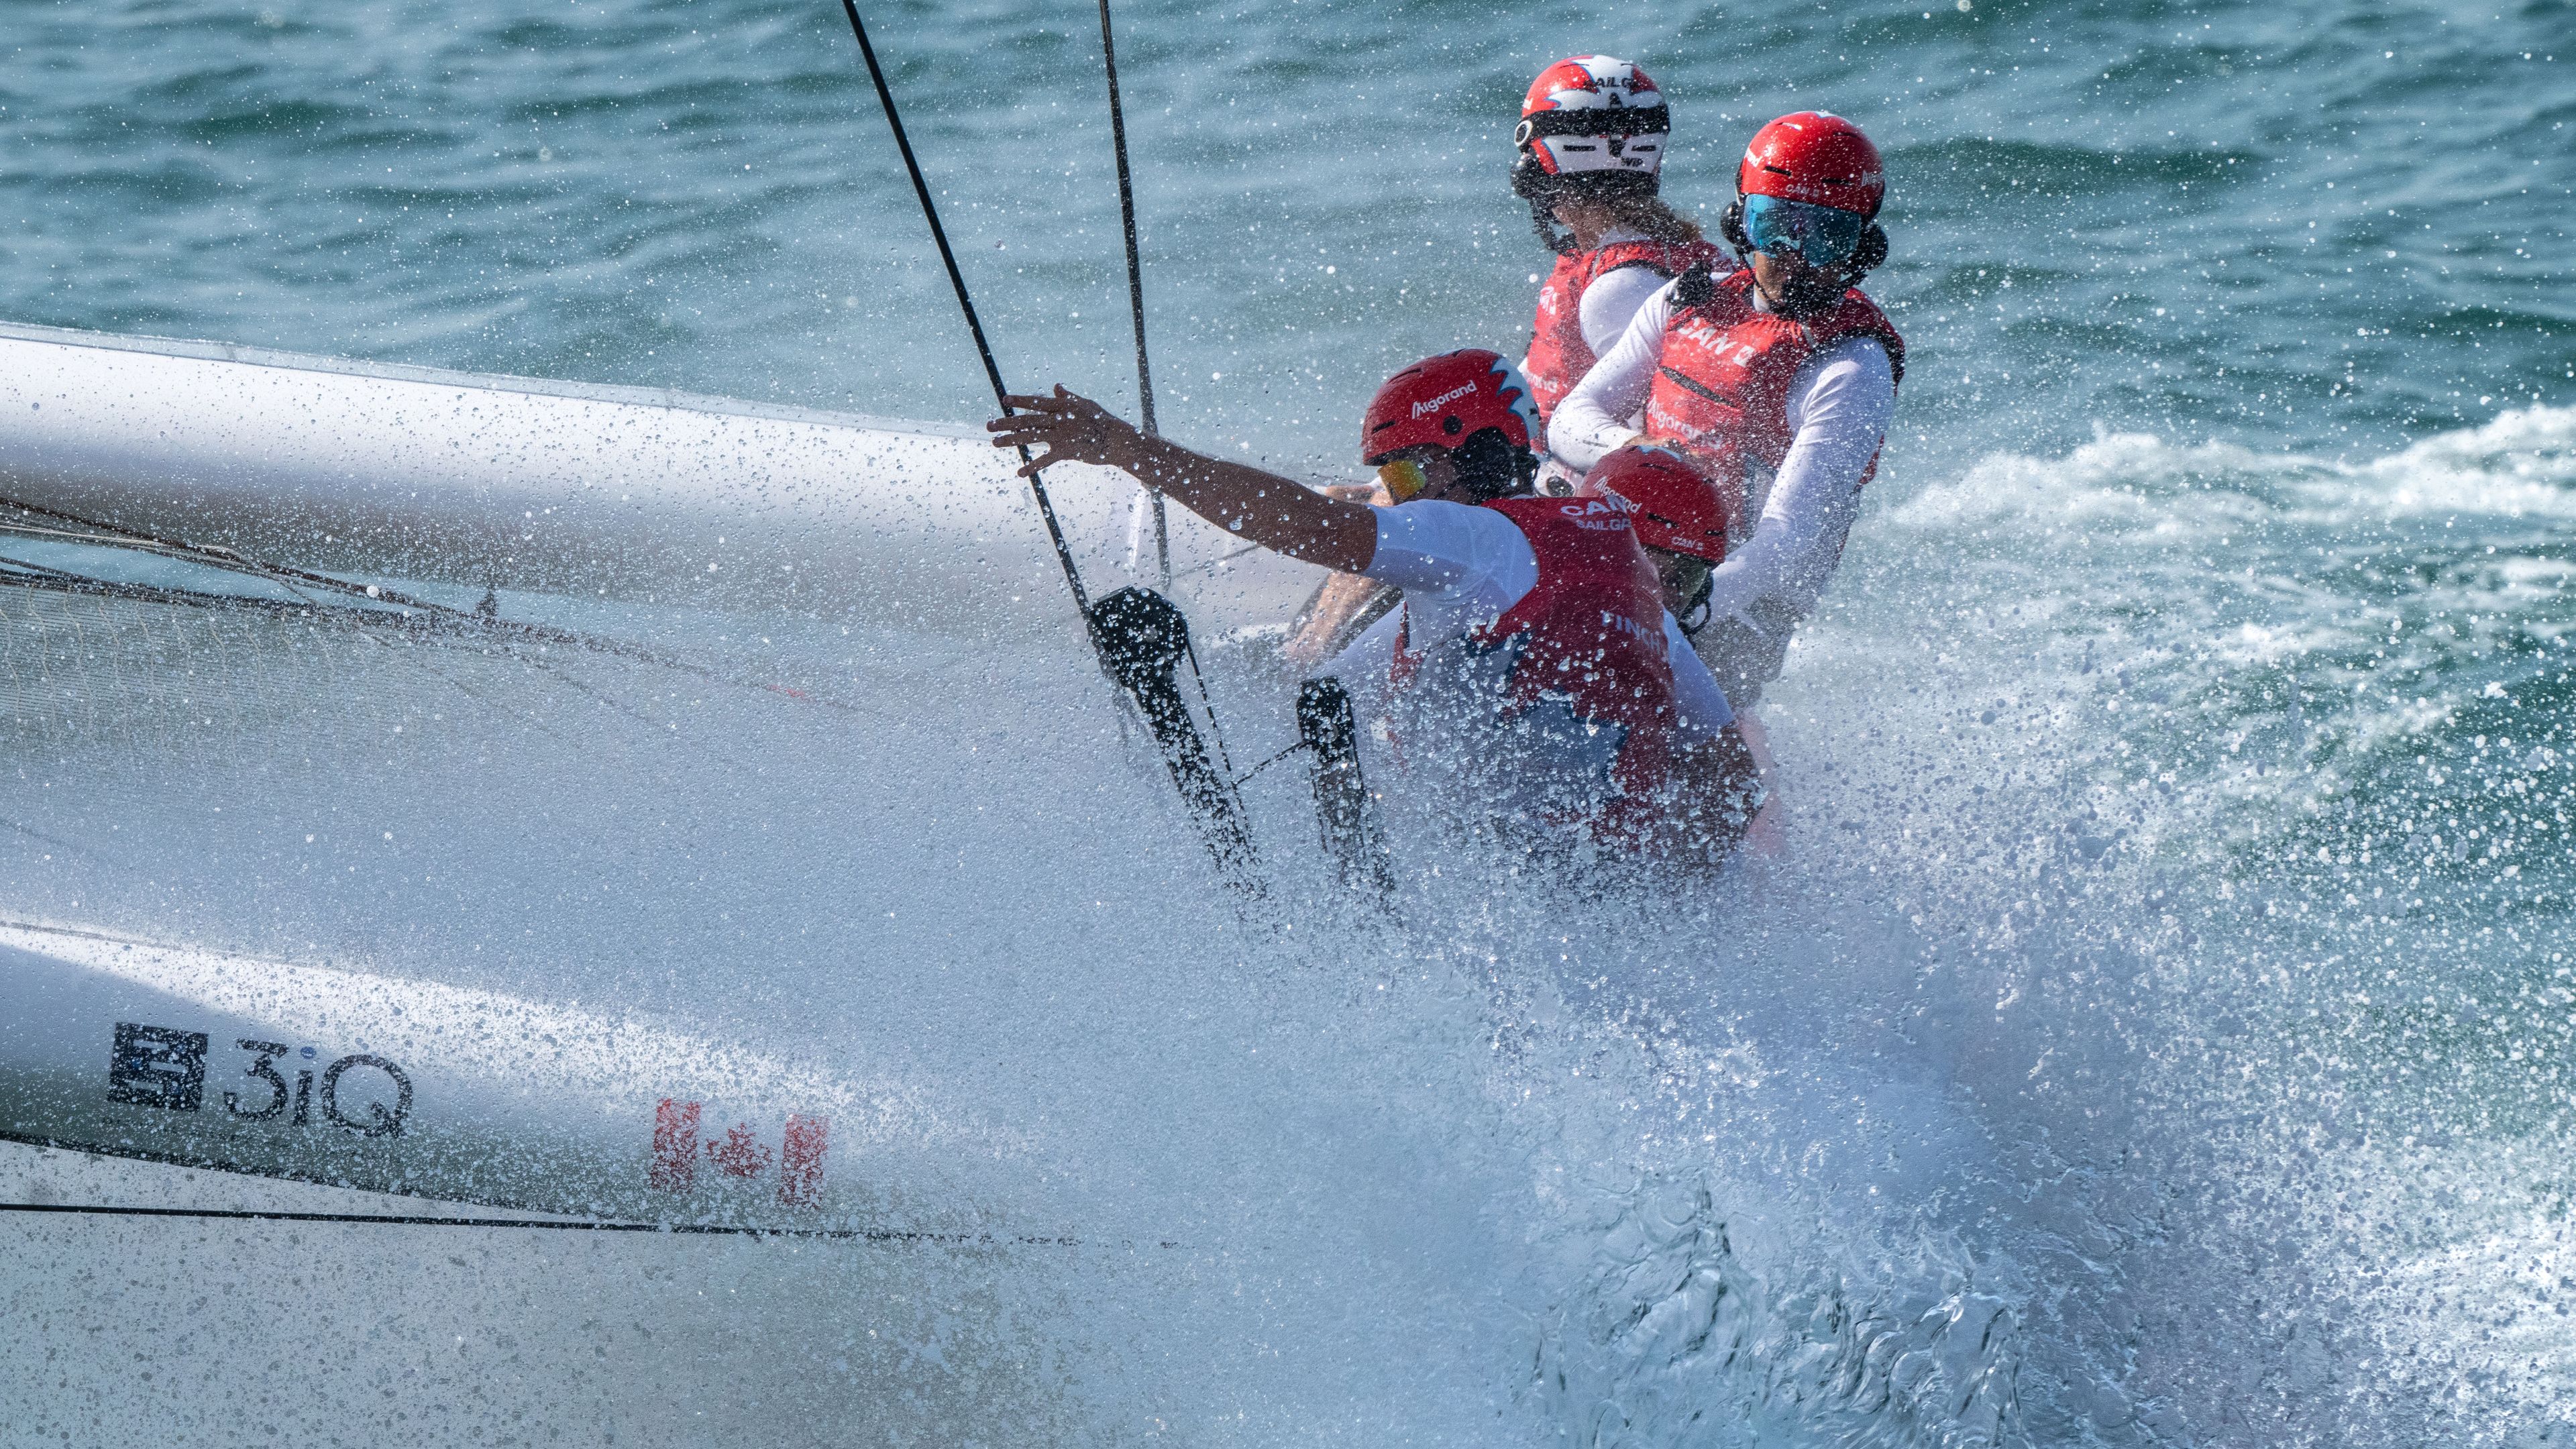 Canada SailGP Team helmed by Phil Robertson on the water at the Dubai Sail Grand Prix.